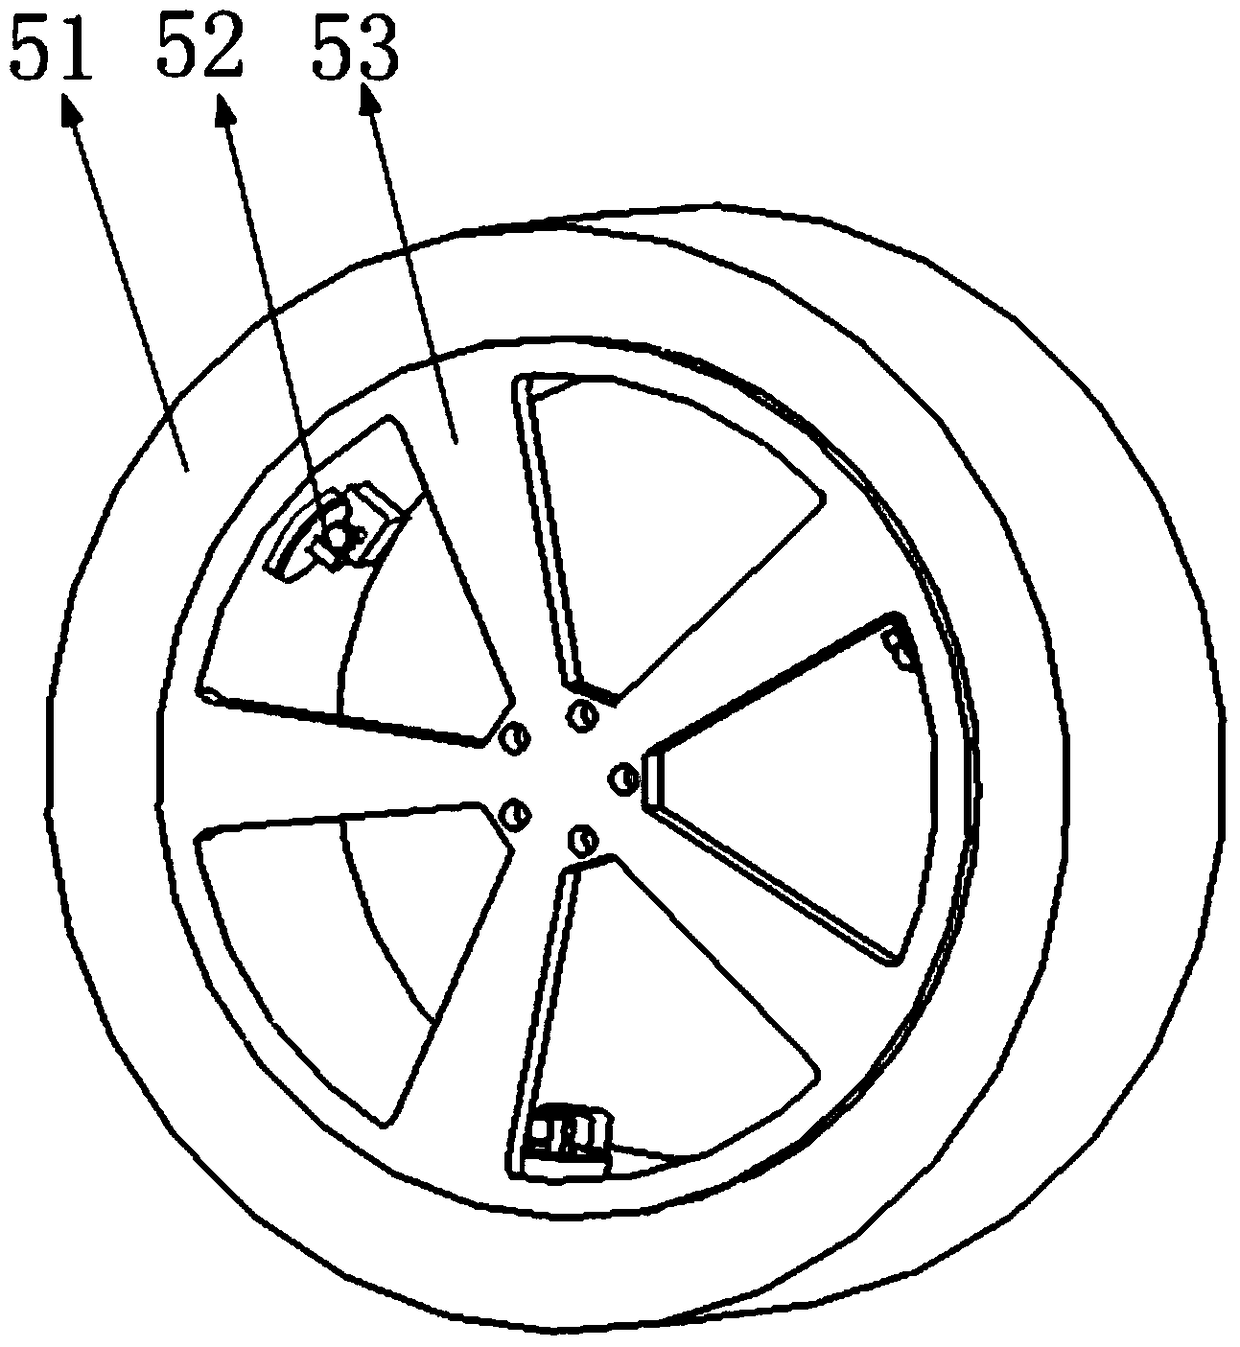 A wheel with adjustable comfort